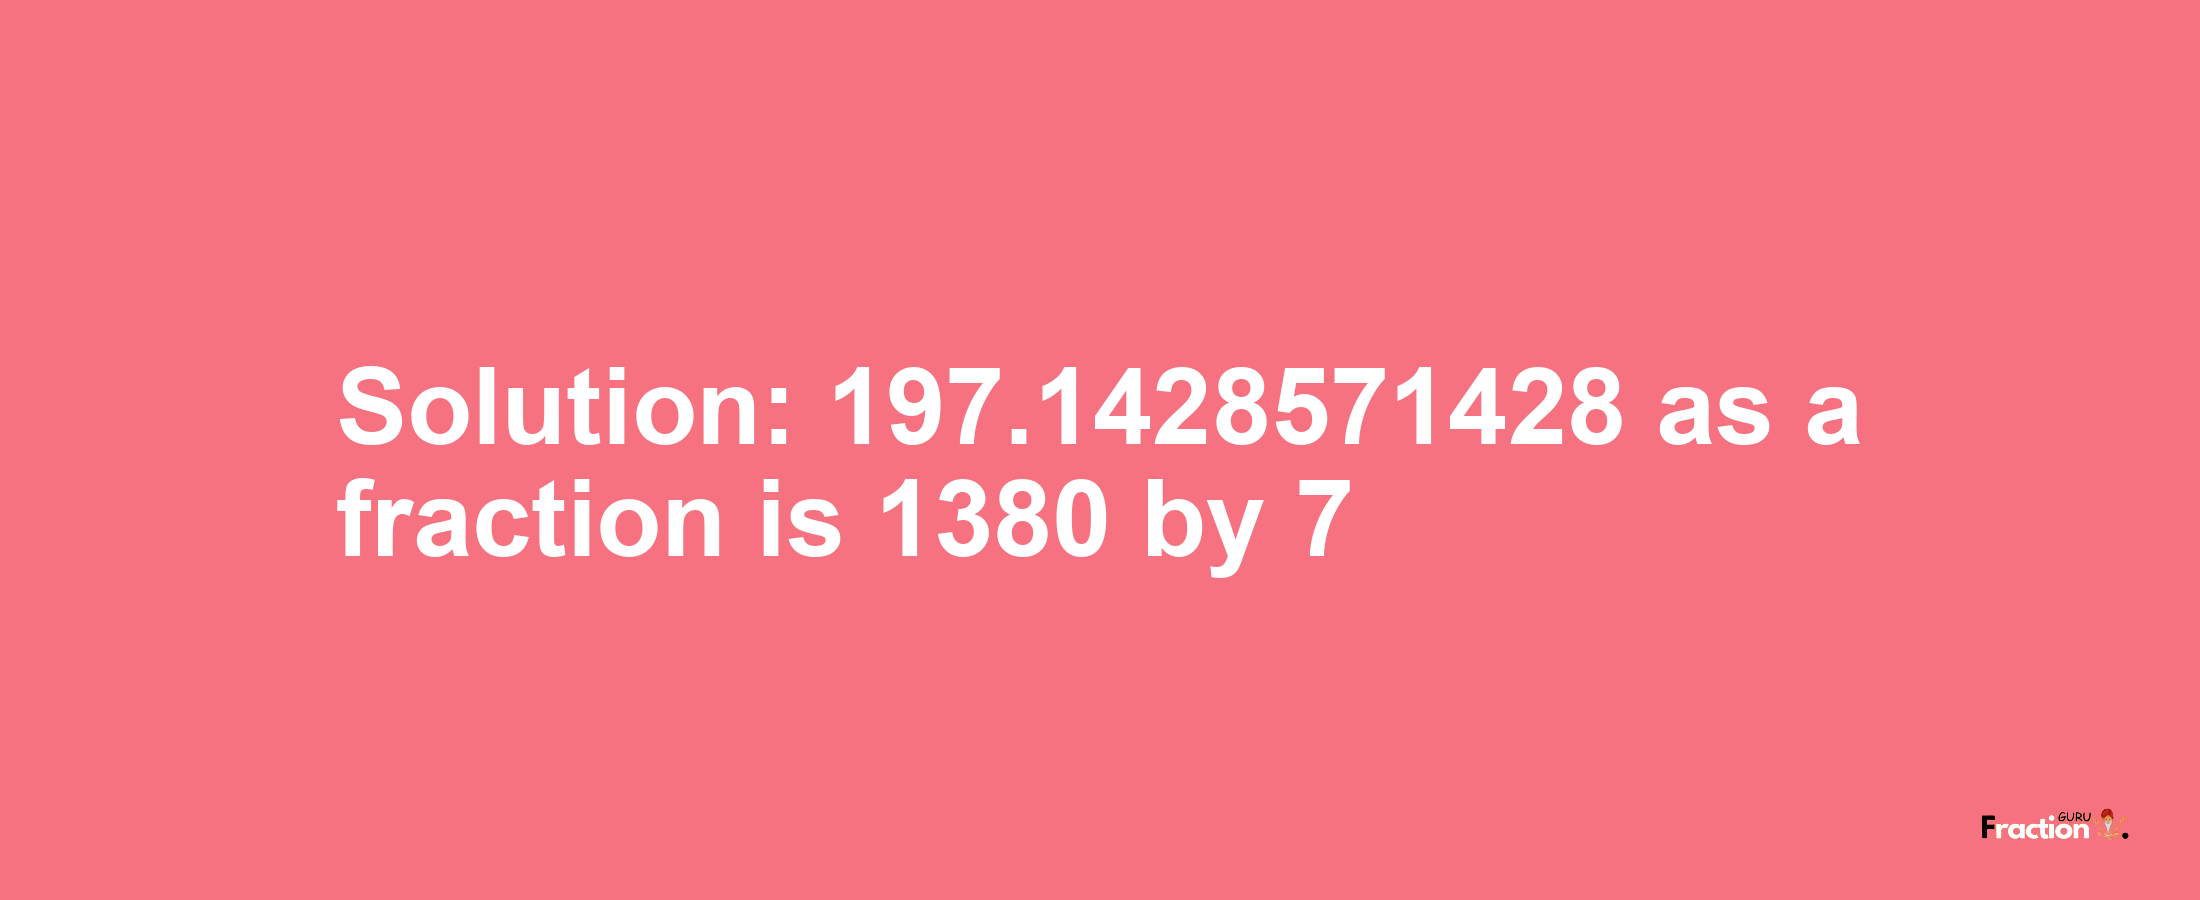 Solution:197.1428571428 as a fraction is 1380/7